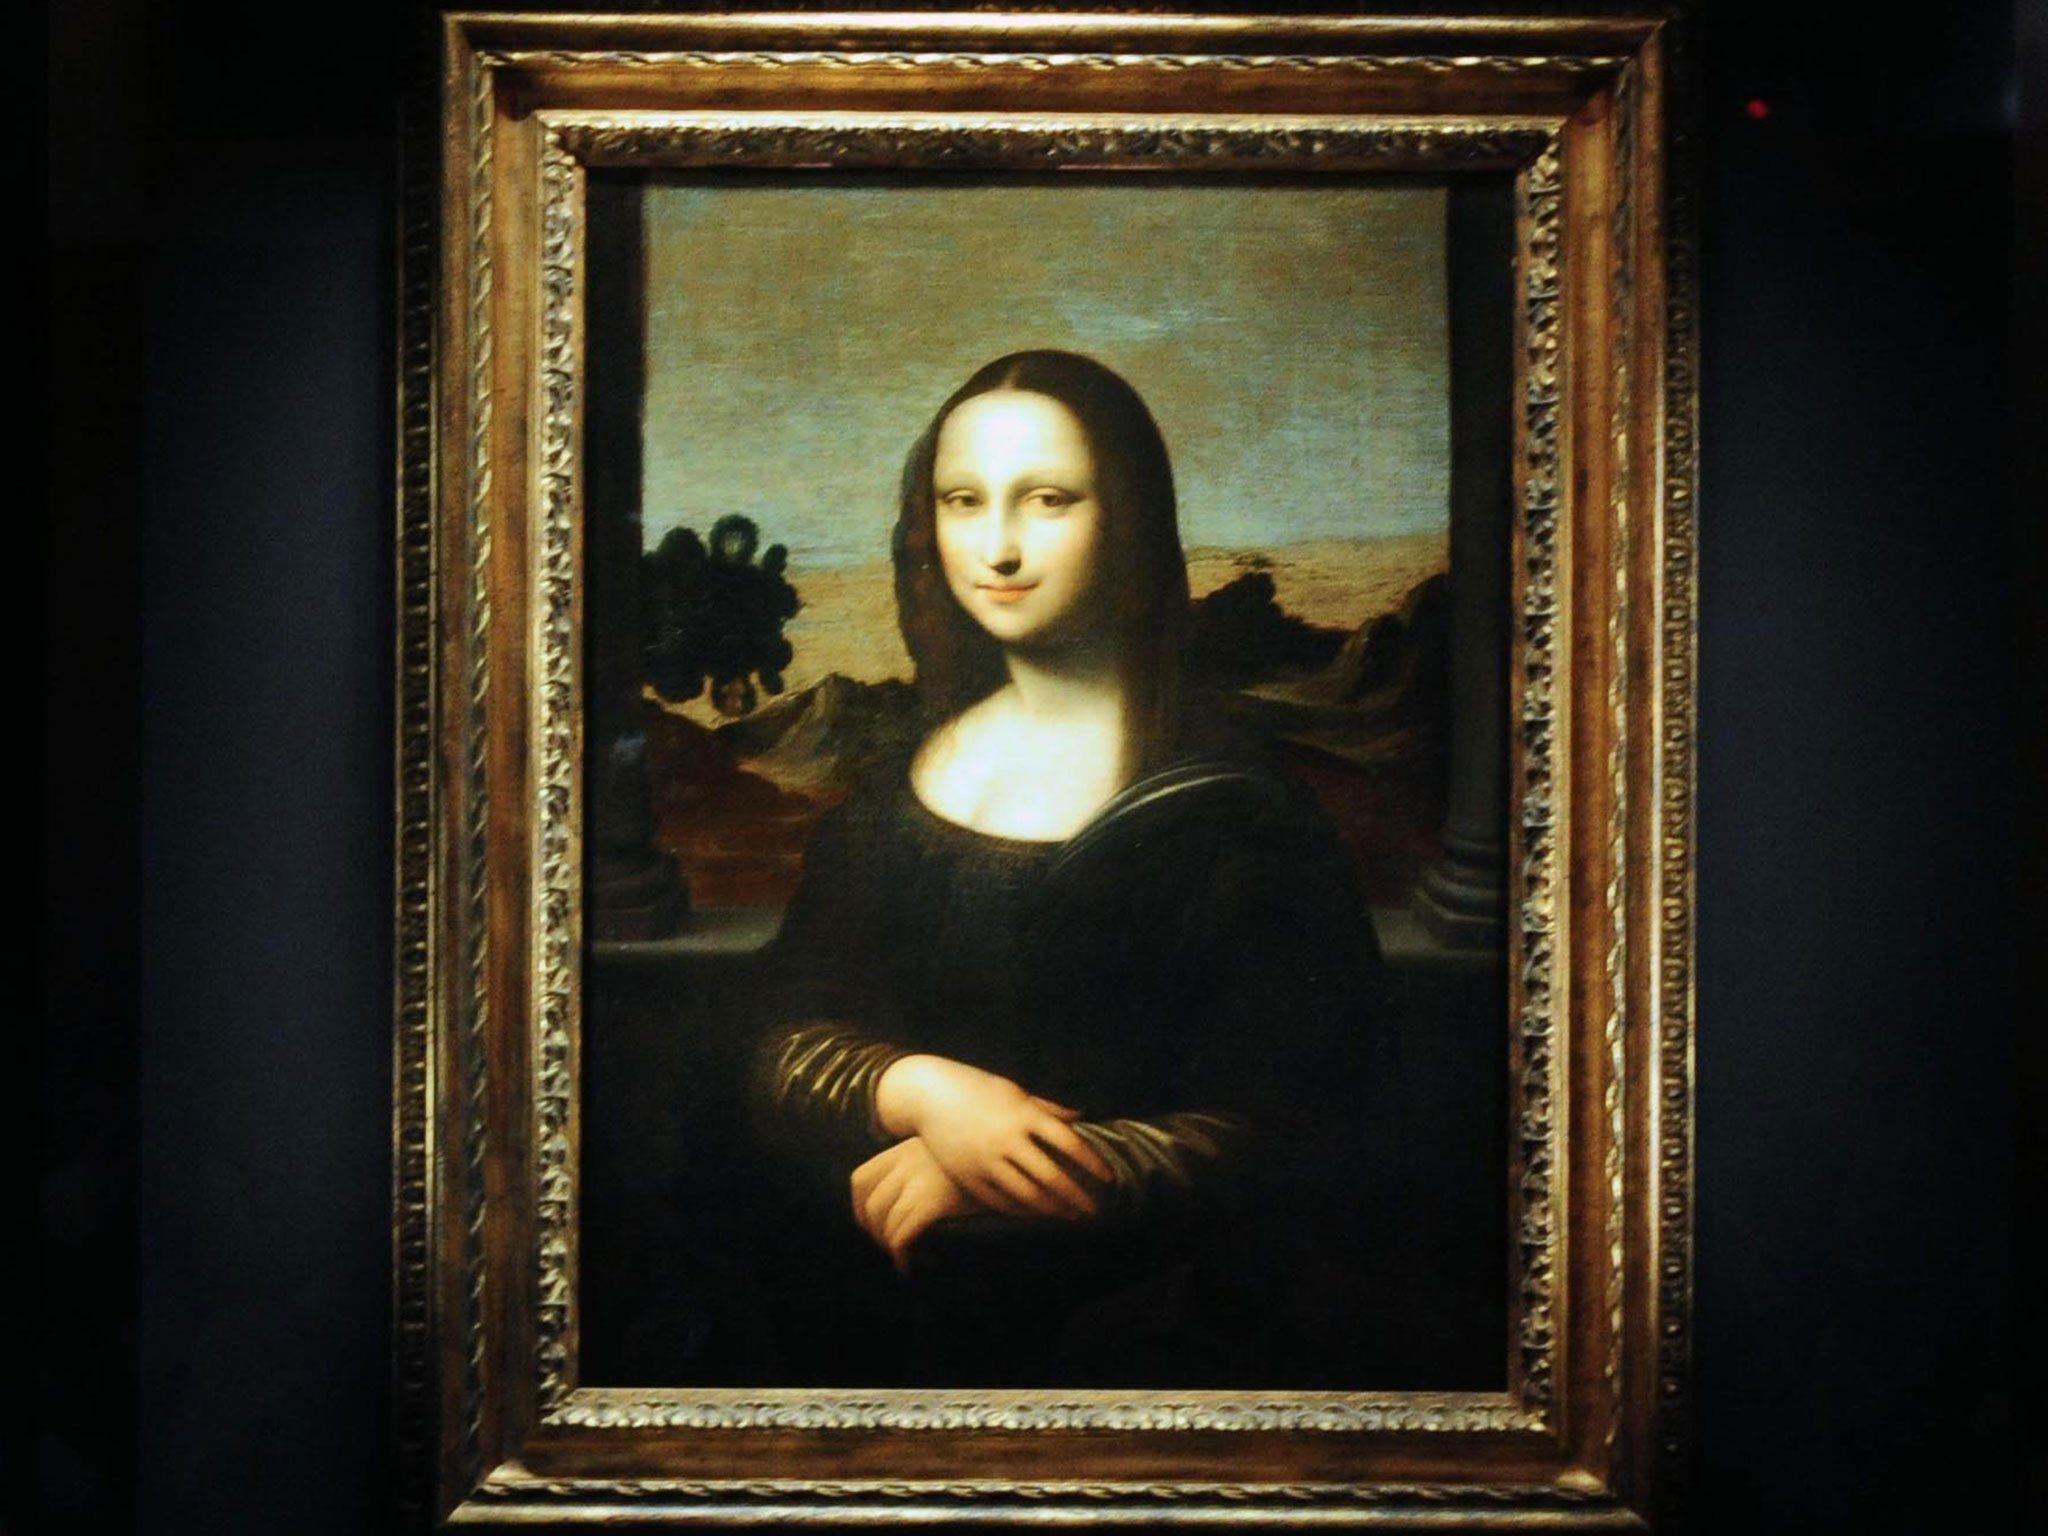 Earlier Mona Lisa' goes on tour in Asia as owners try to prove it is